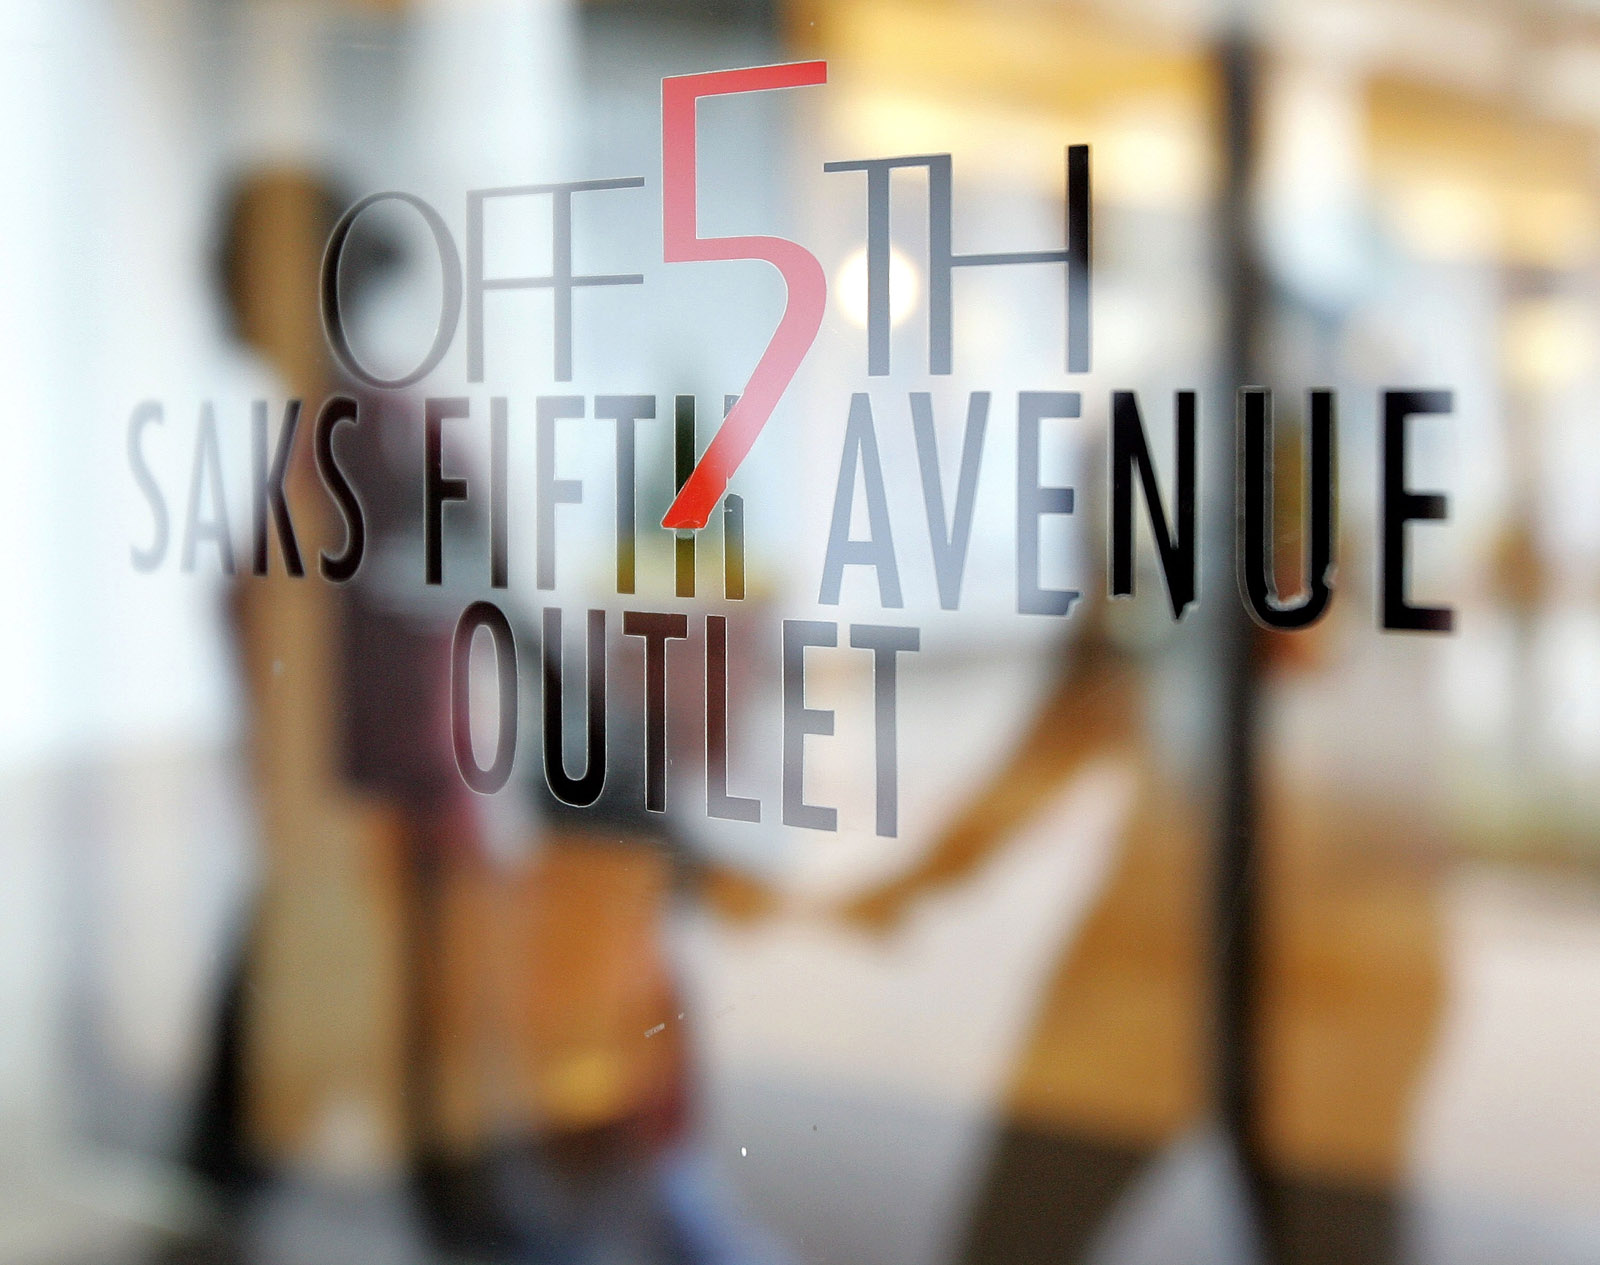 The entrance to Saks Fifth Avenue Outlet. News Photo - Getty Images